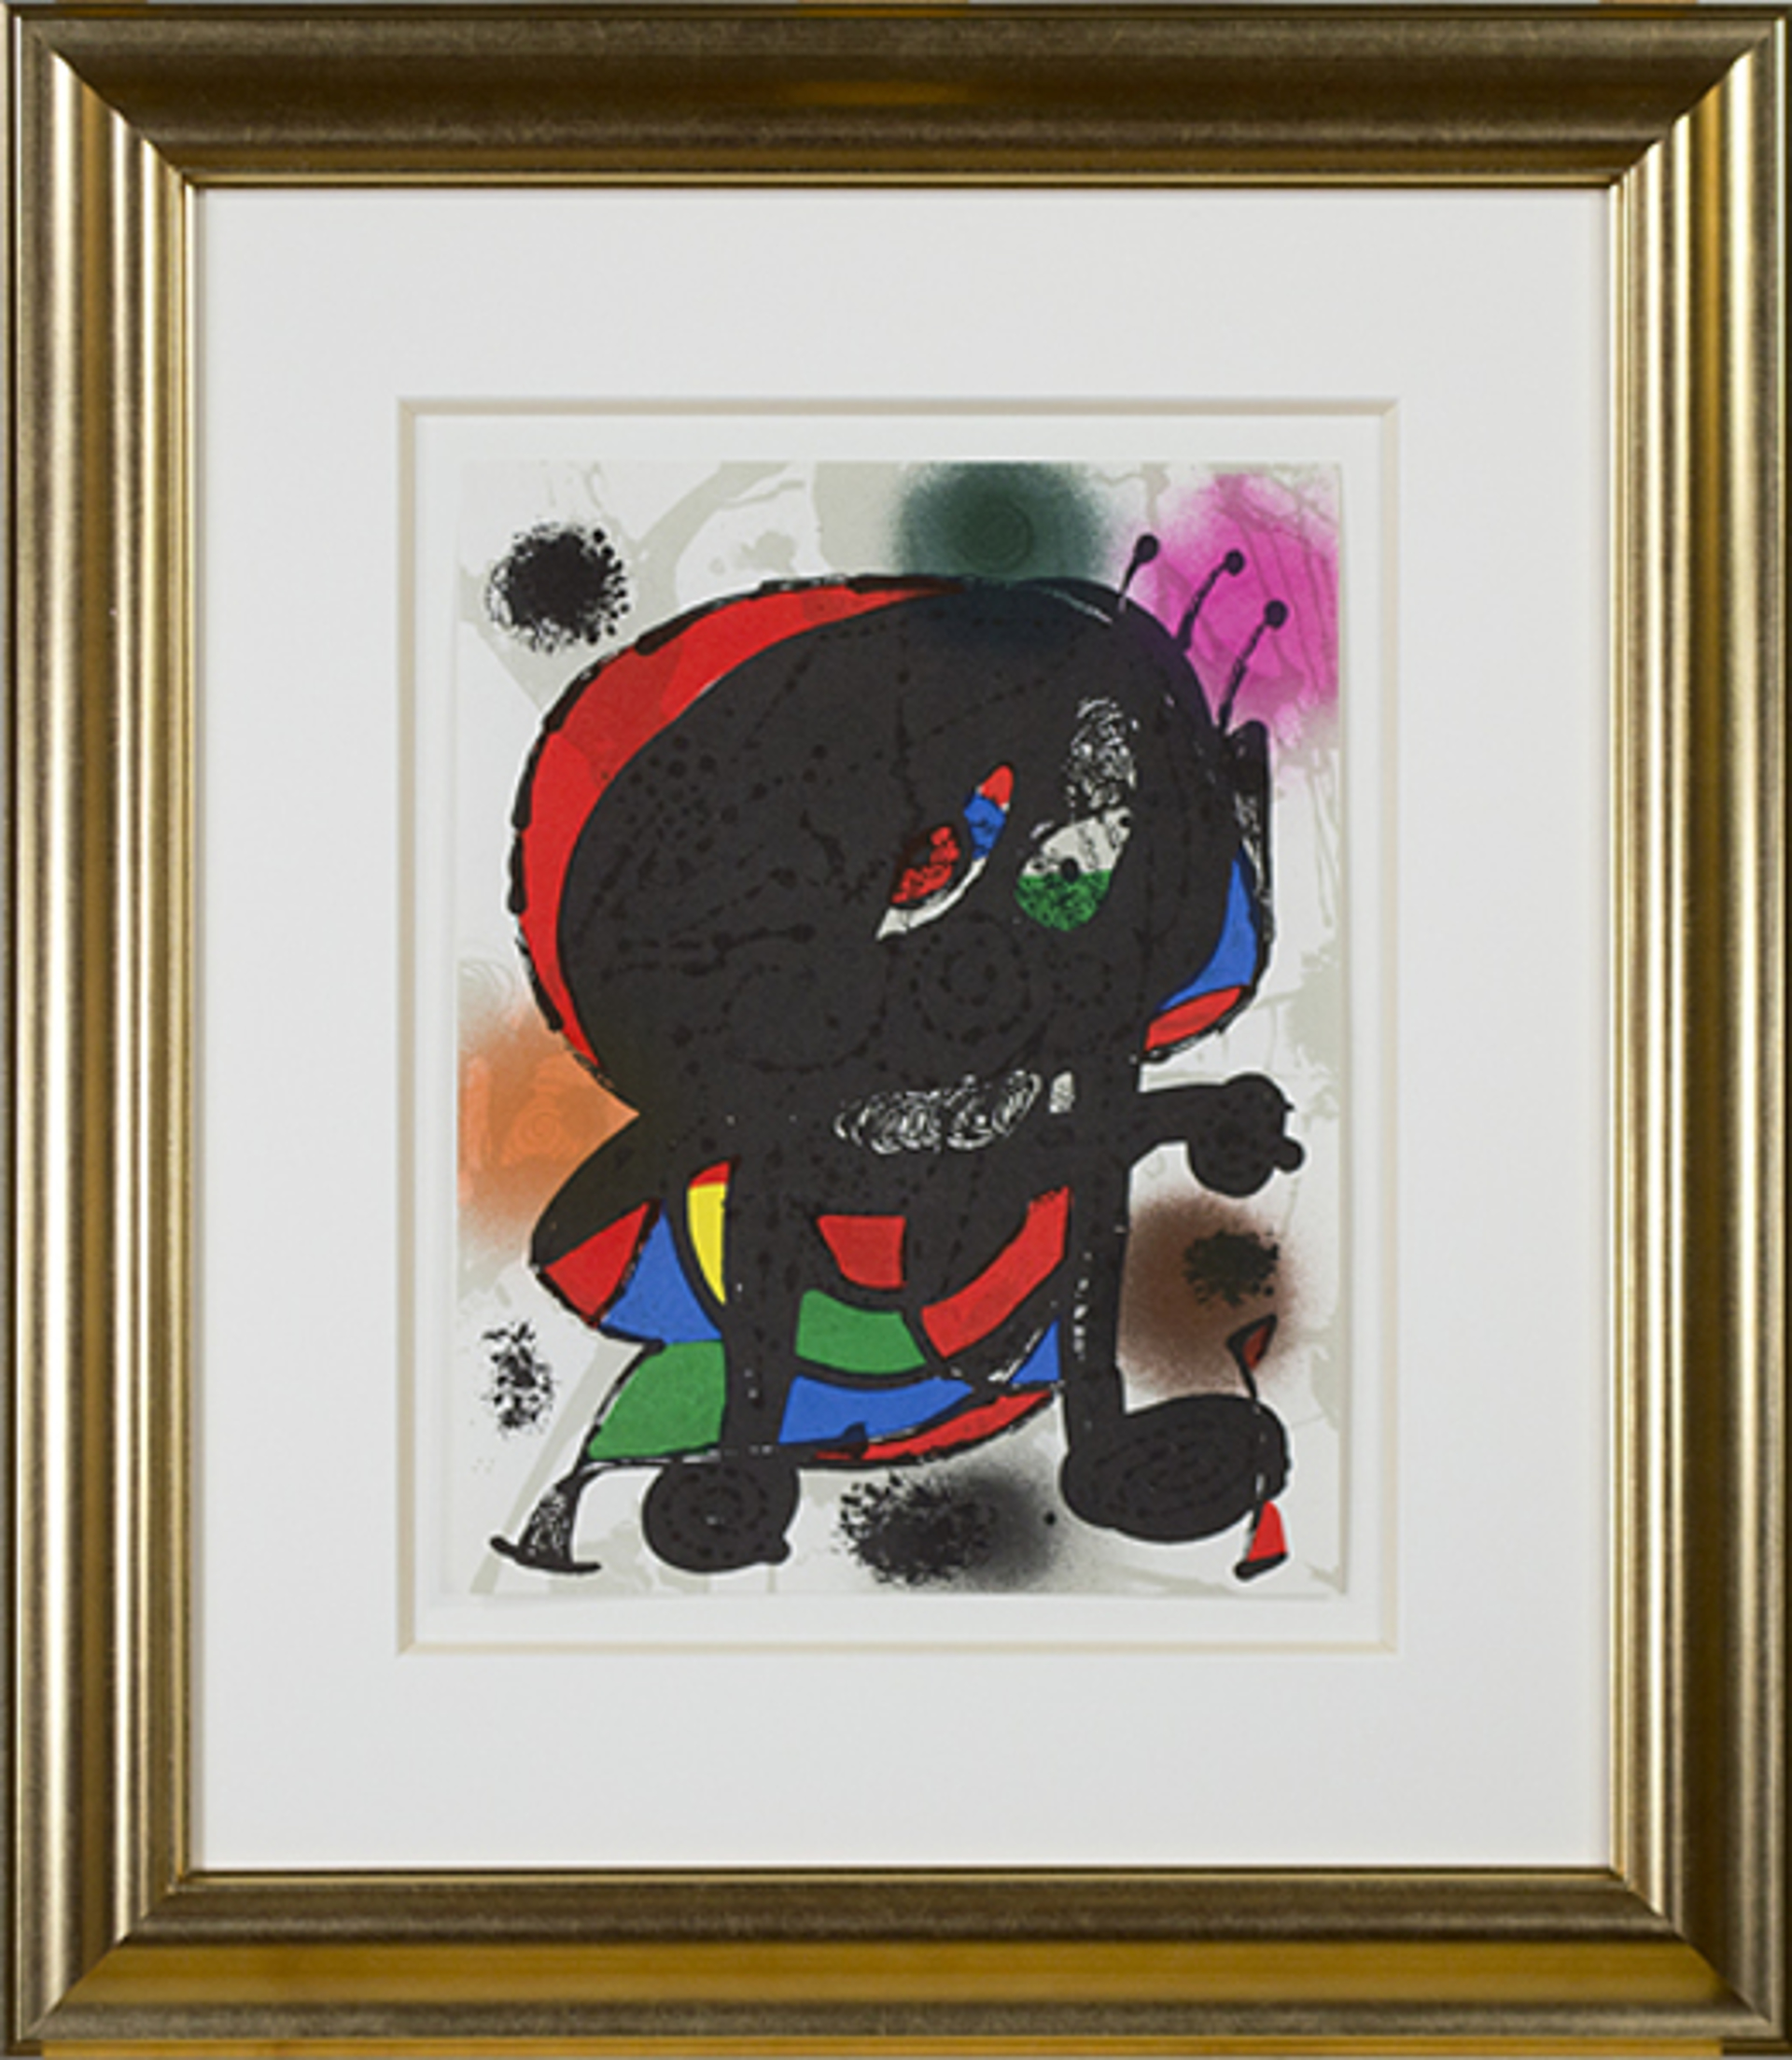 Original Lithograph III from "Miro Lithographs III, Maeght Publisher" by Joan Miró